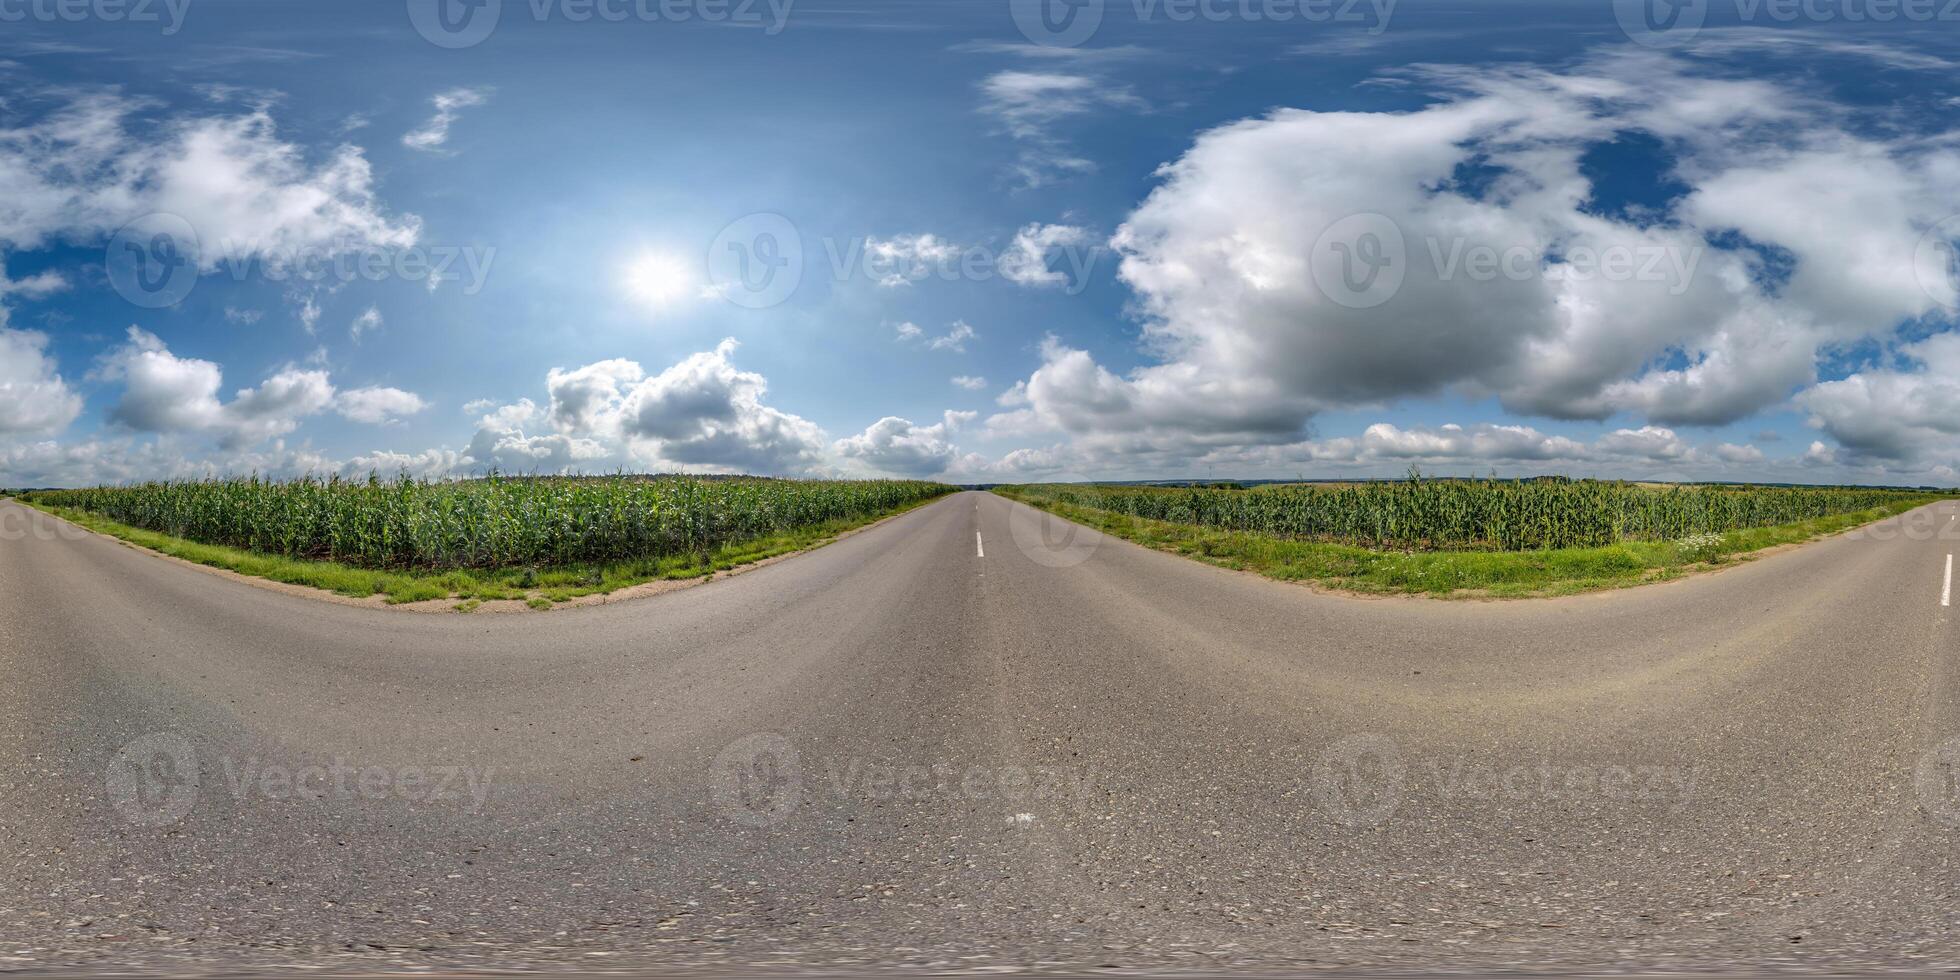 spherical 360 hdri panorama on old asphalt road among corn fields with clouds and sun on blue sky in equirectangular seamless projection, as skydome replacement in drone panoramas, game development photo